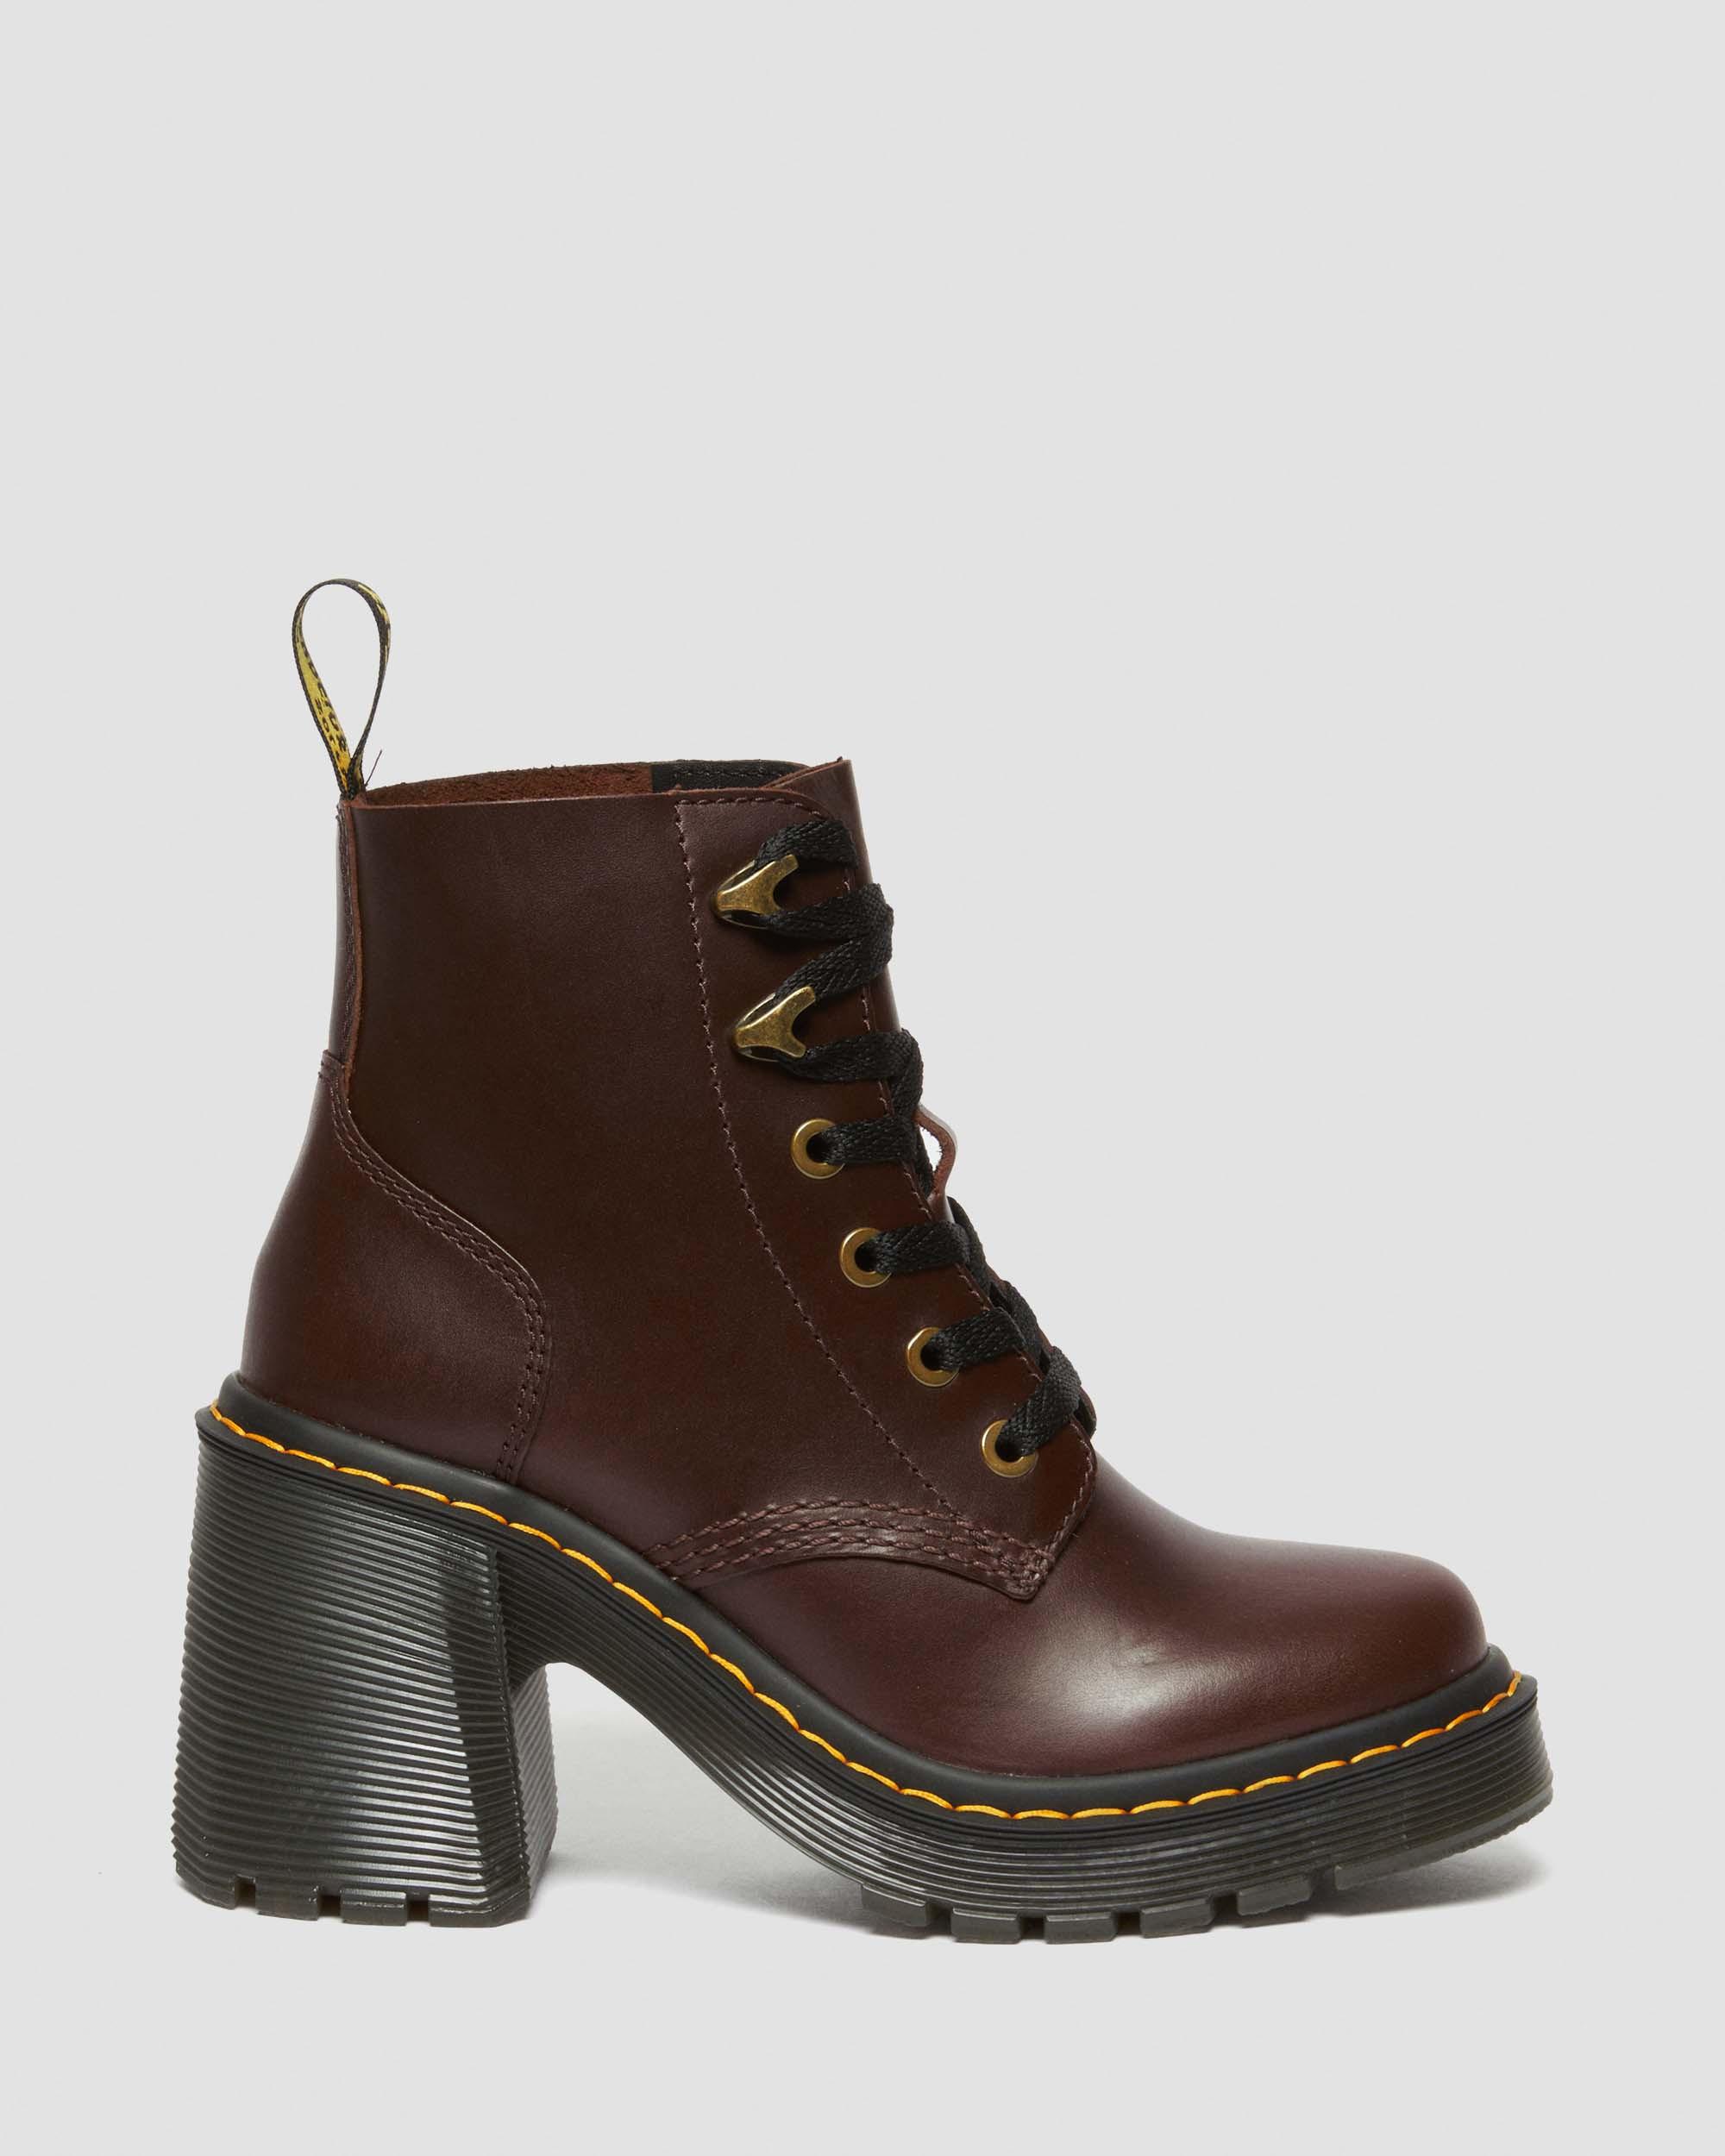 Jesy Leather Flared Heel Boots in Dark Brown | Dr. Martens